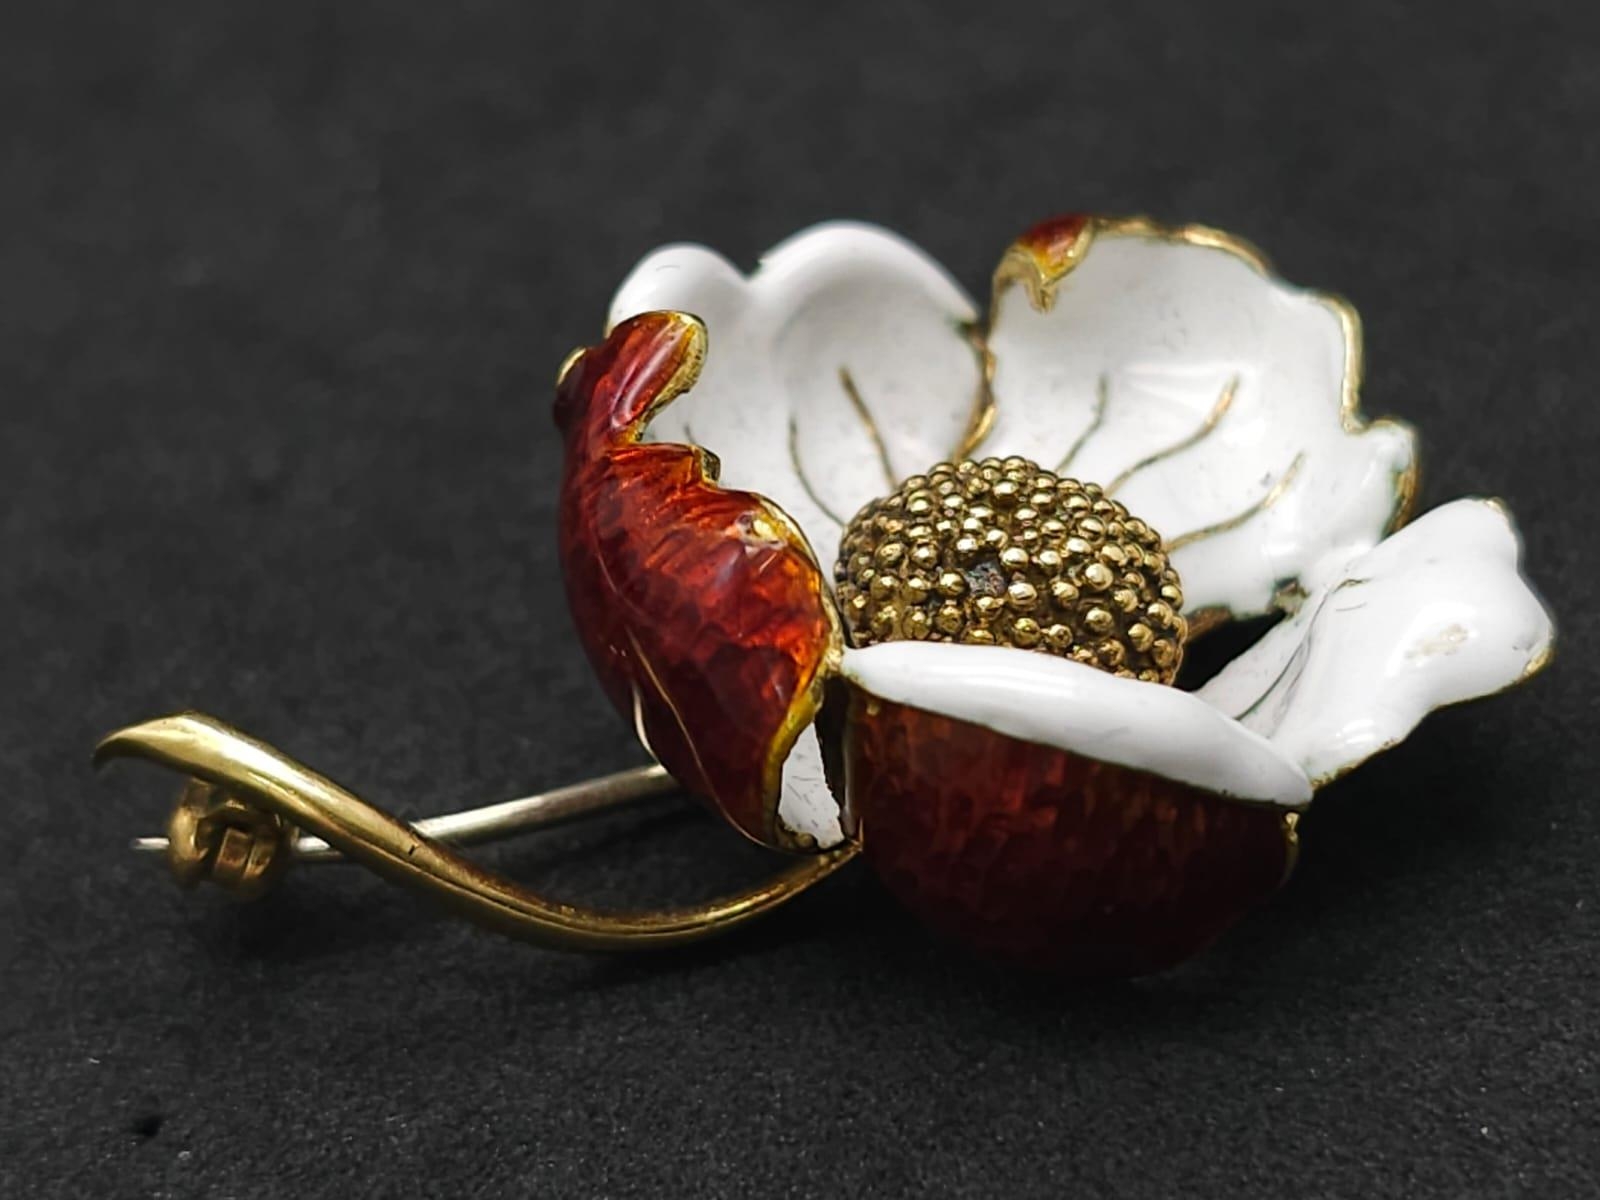 A Wonderful Vintage, Possibly Antique 18K Yellow Gold and Enamel Floral Brooch. Excellent inlaid - Image 2 of 11